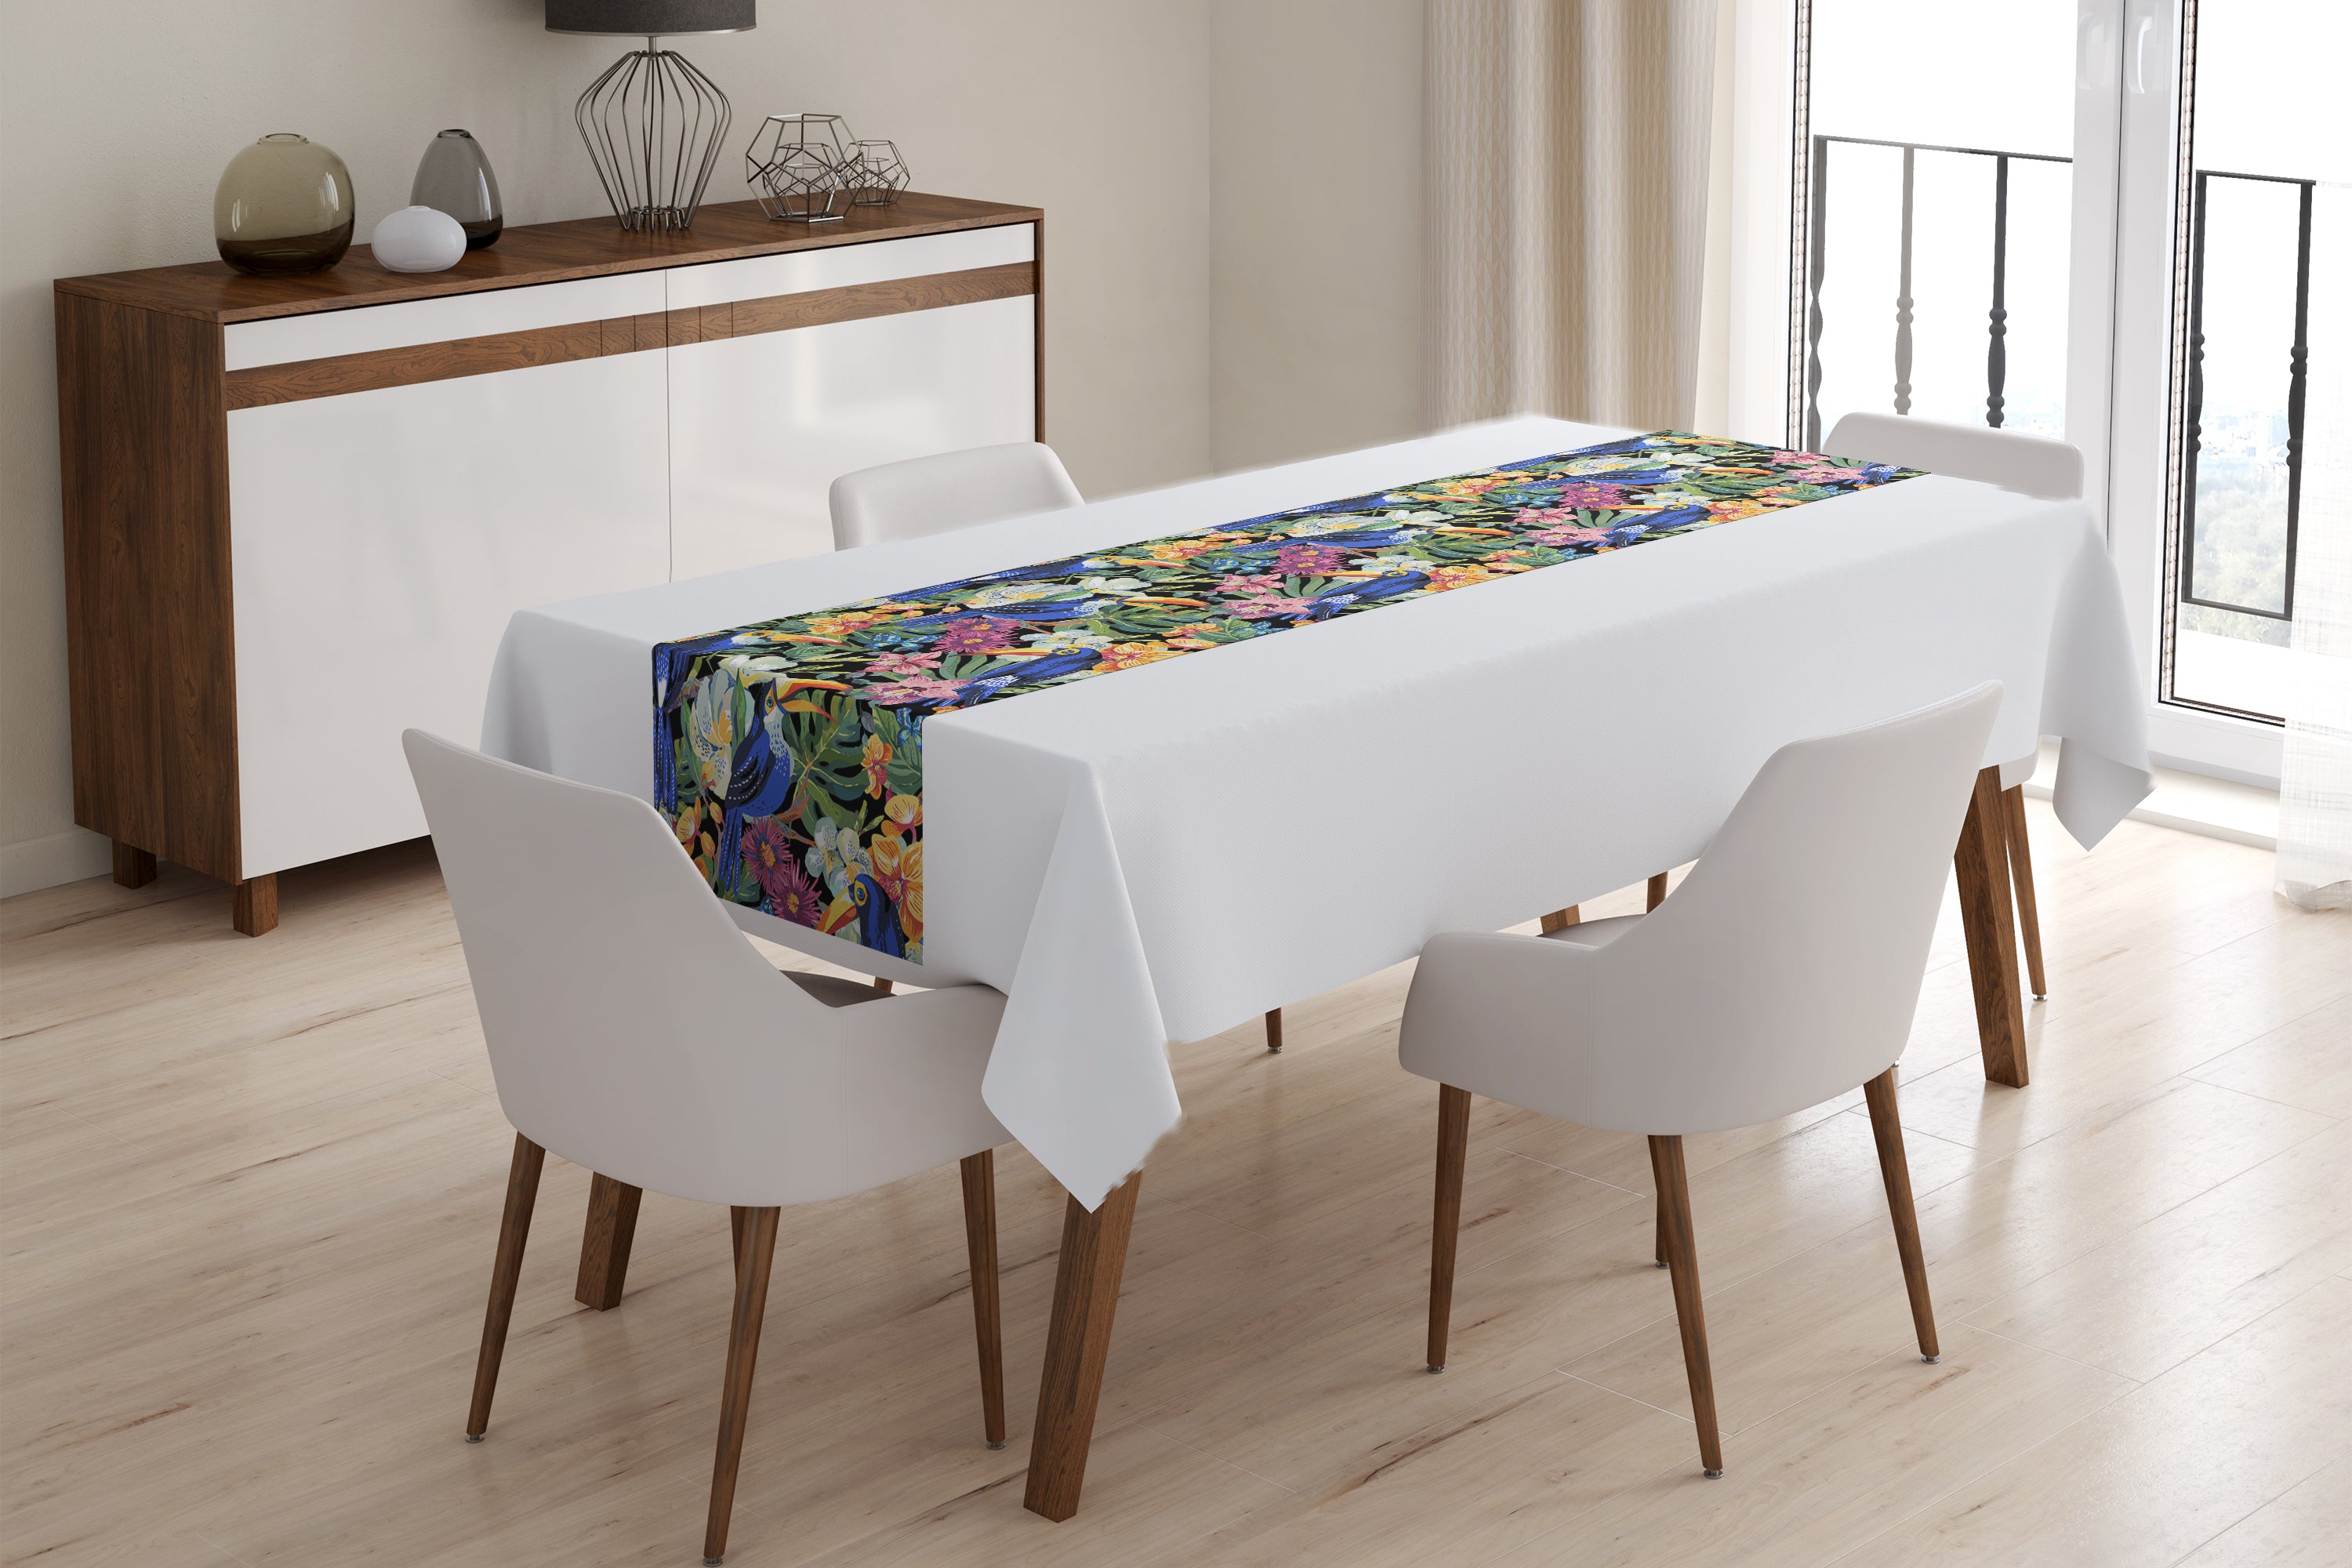 Table Runner Awesome Watercolor Parrots - Wellmira